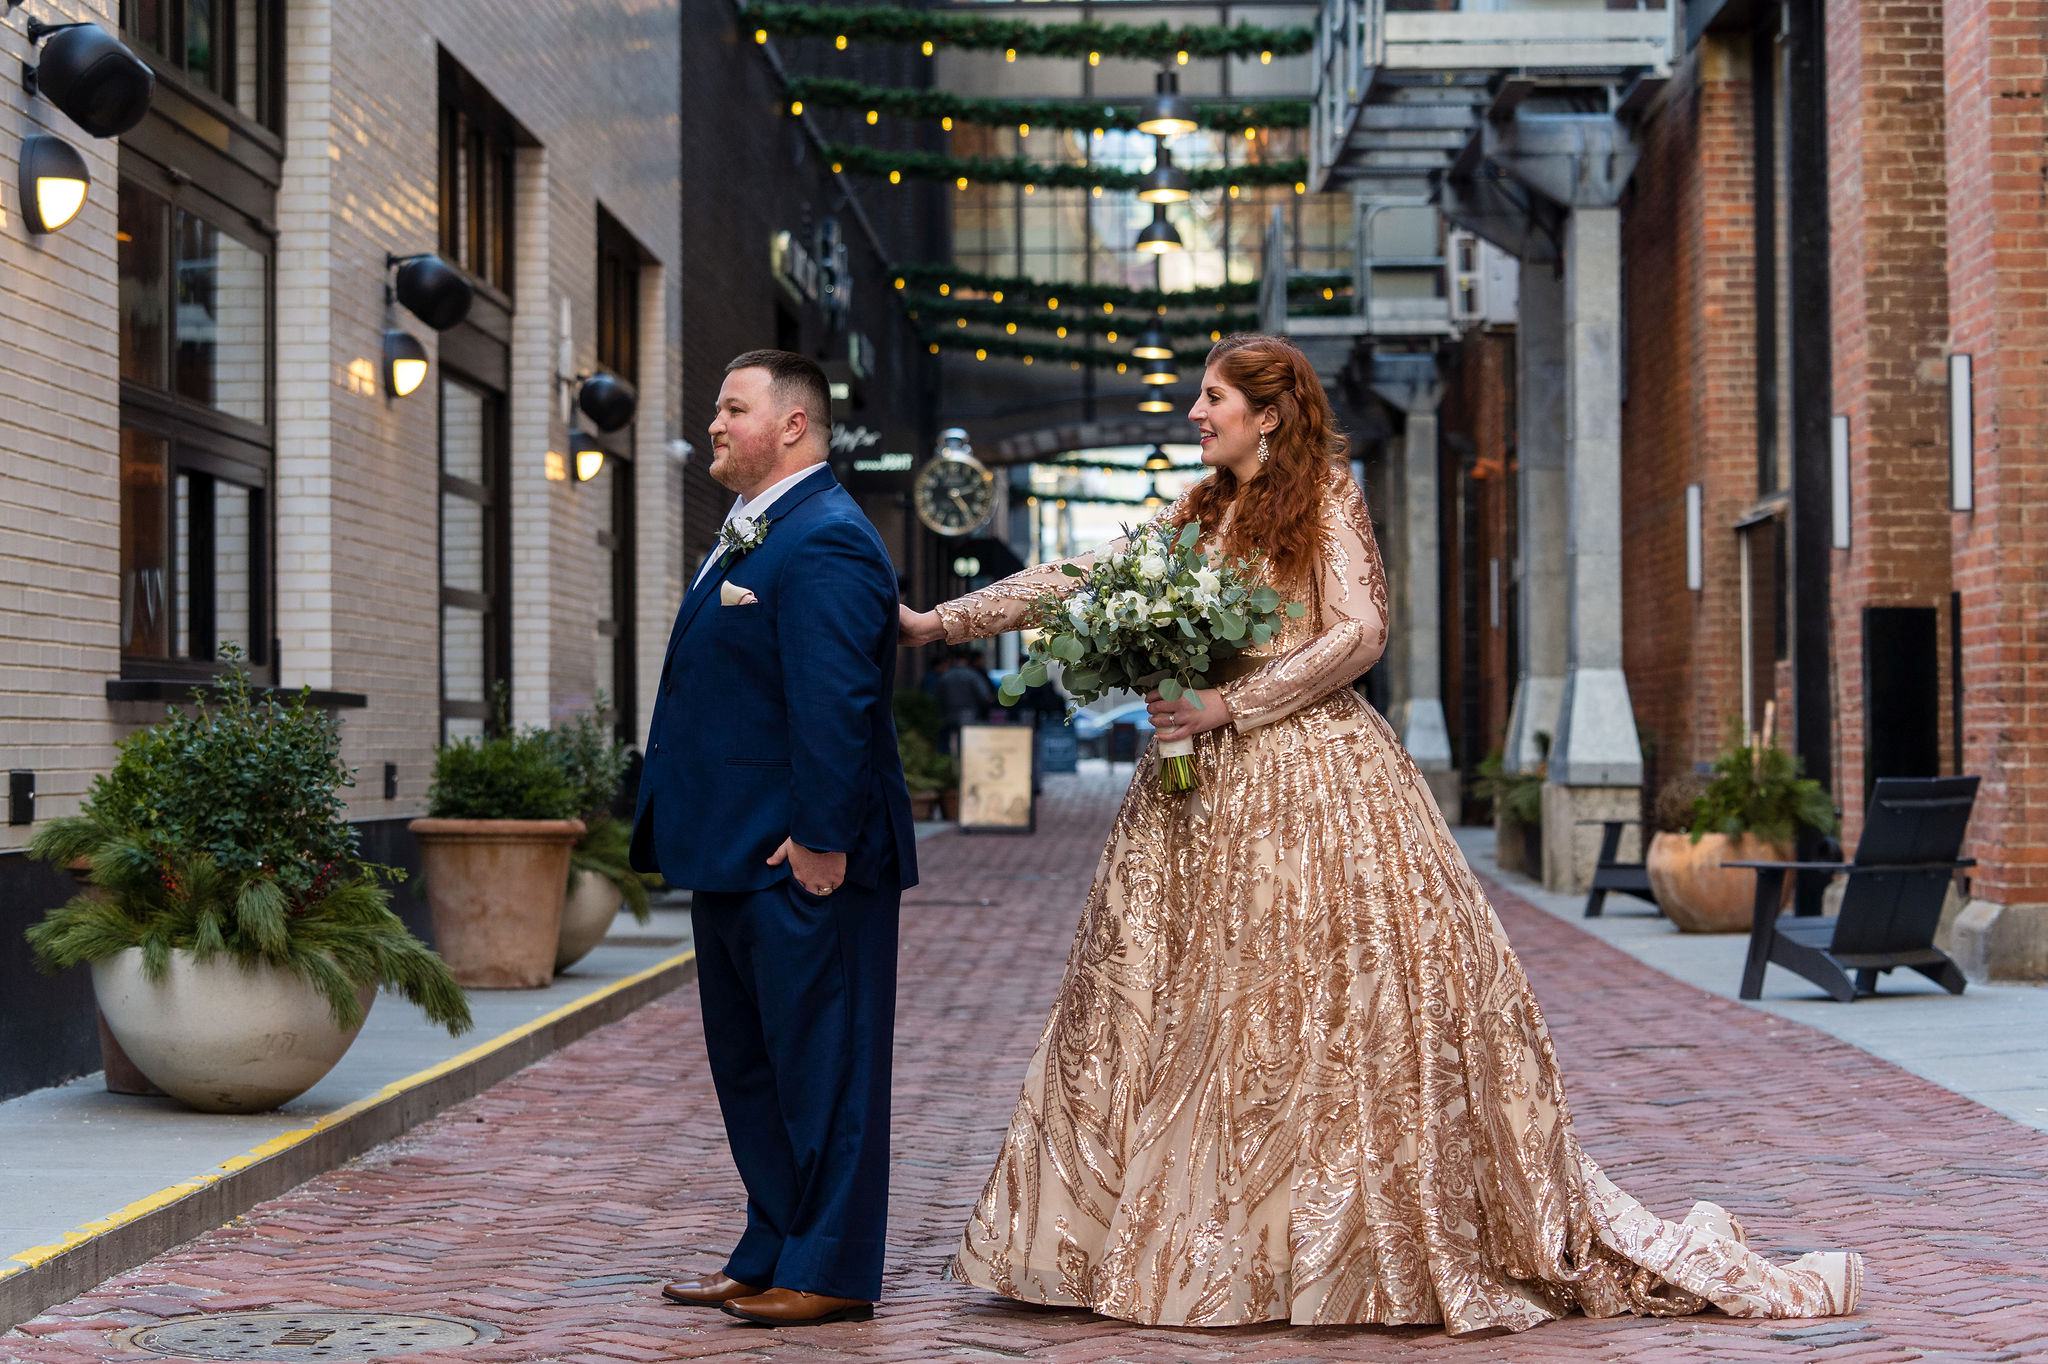 A bride, wearing a gold wedding dress, taps her groom on the shoulder during their first look in Parker's Alley.  